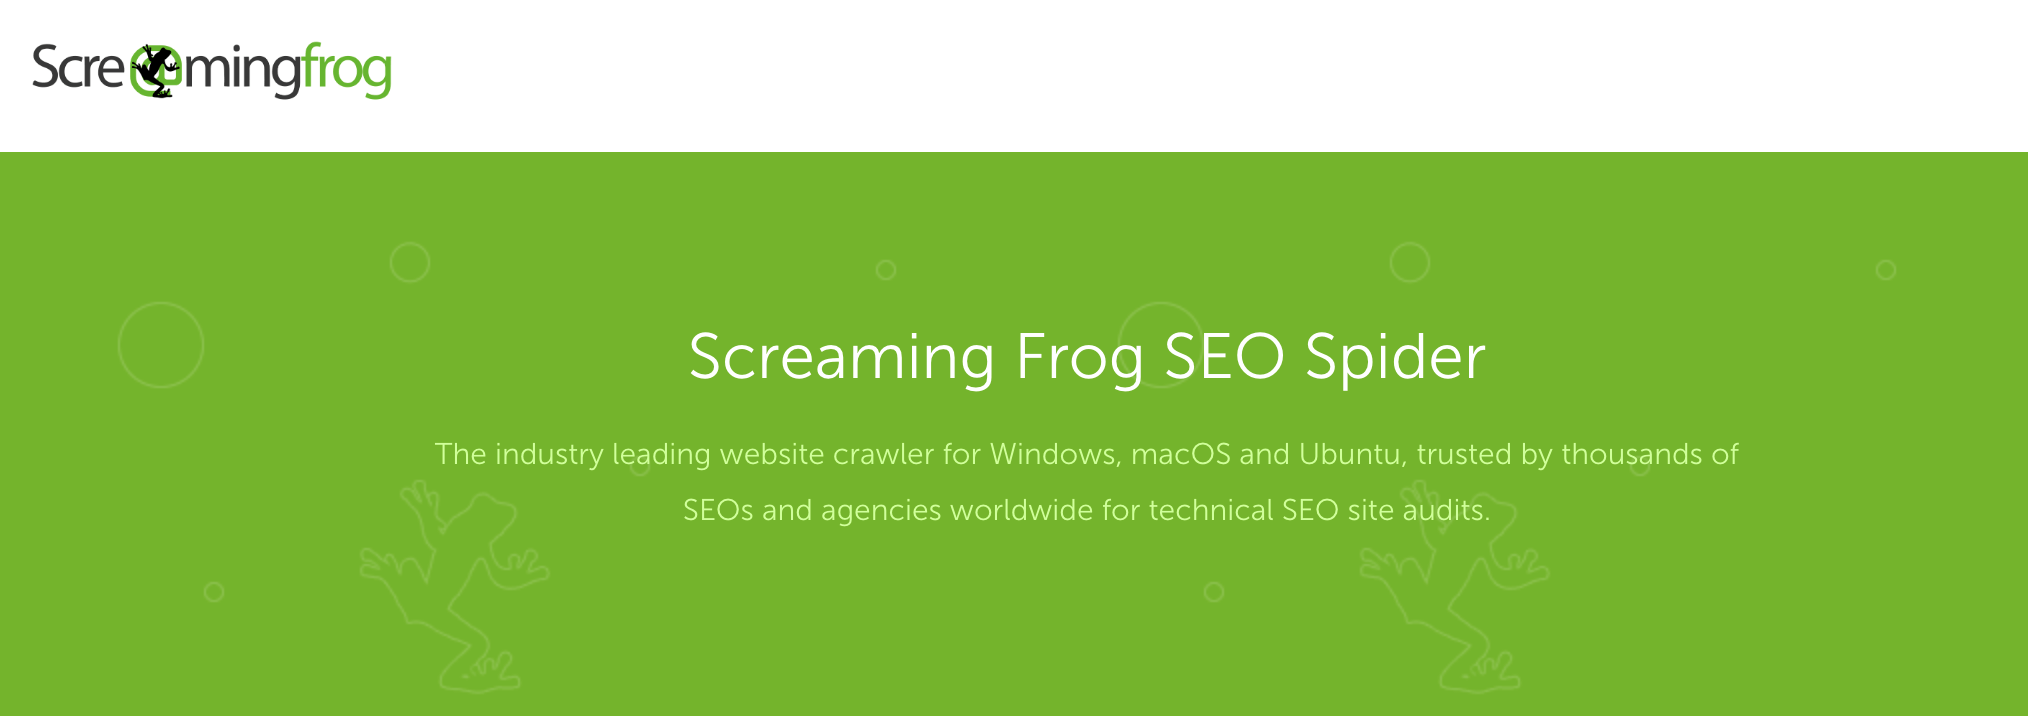 SEO Analyse Tool: Screaming Frog SEO Spider